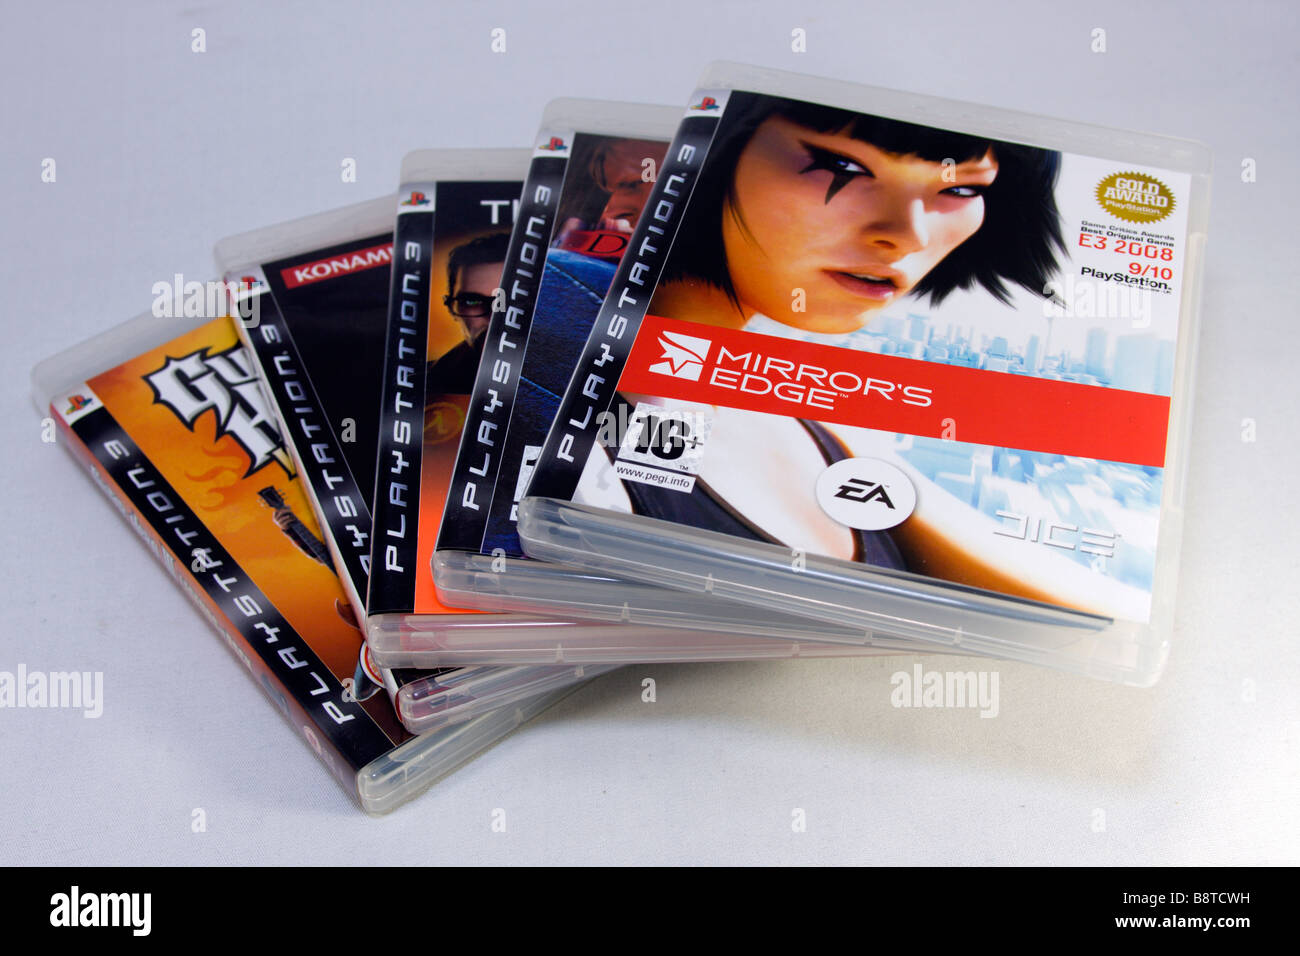  Mirror's Edge - Playstation 3 : Video Games